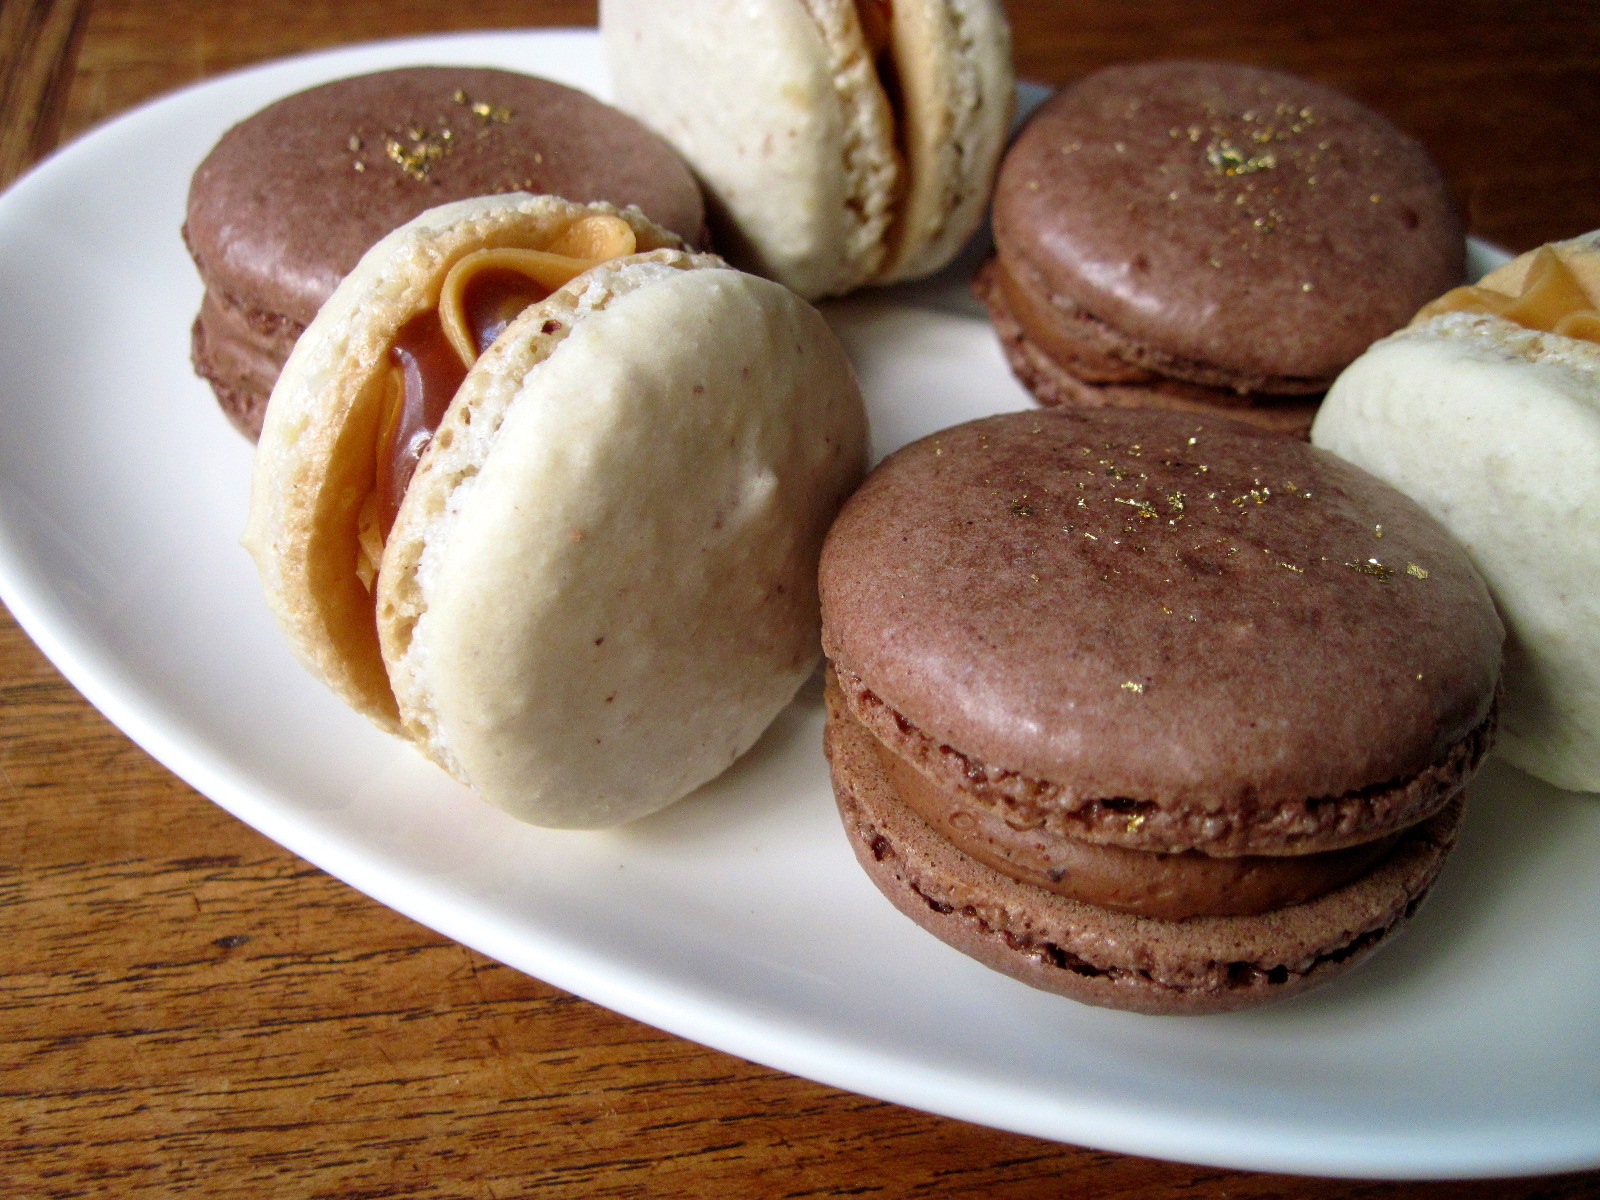 Salted Caramel and Mexican Chocolate Macarons